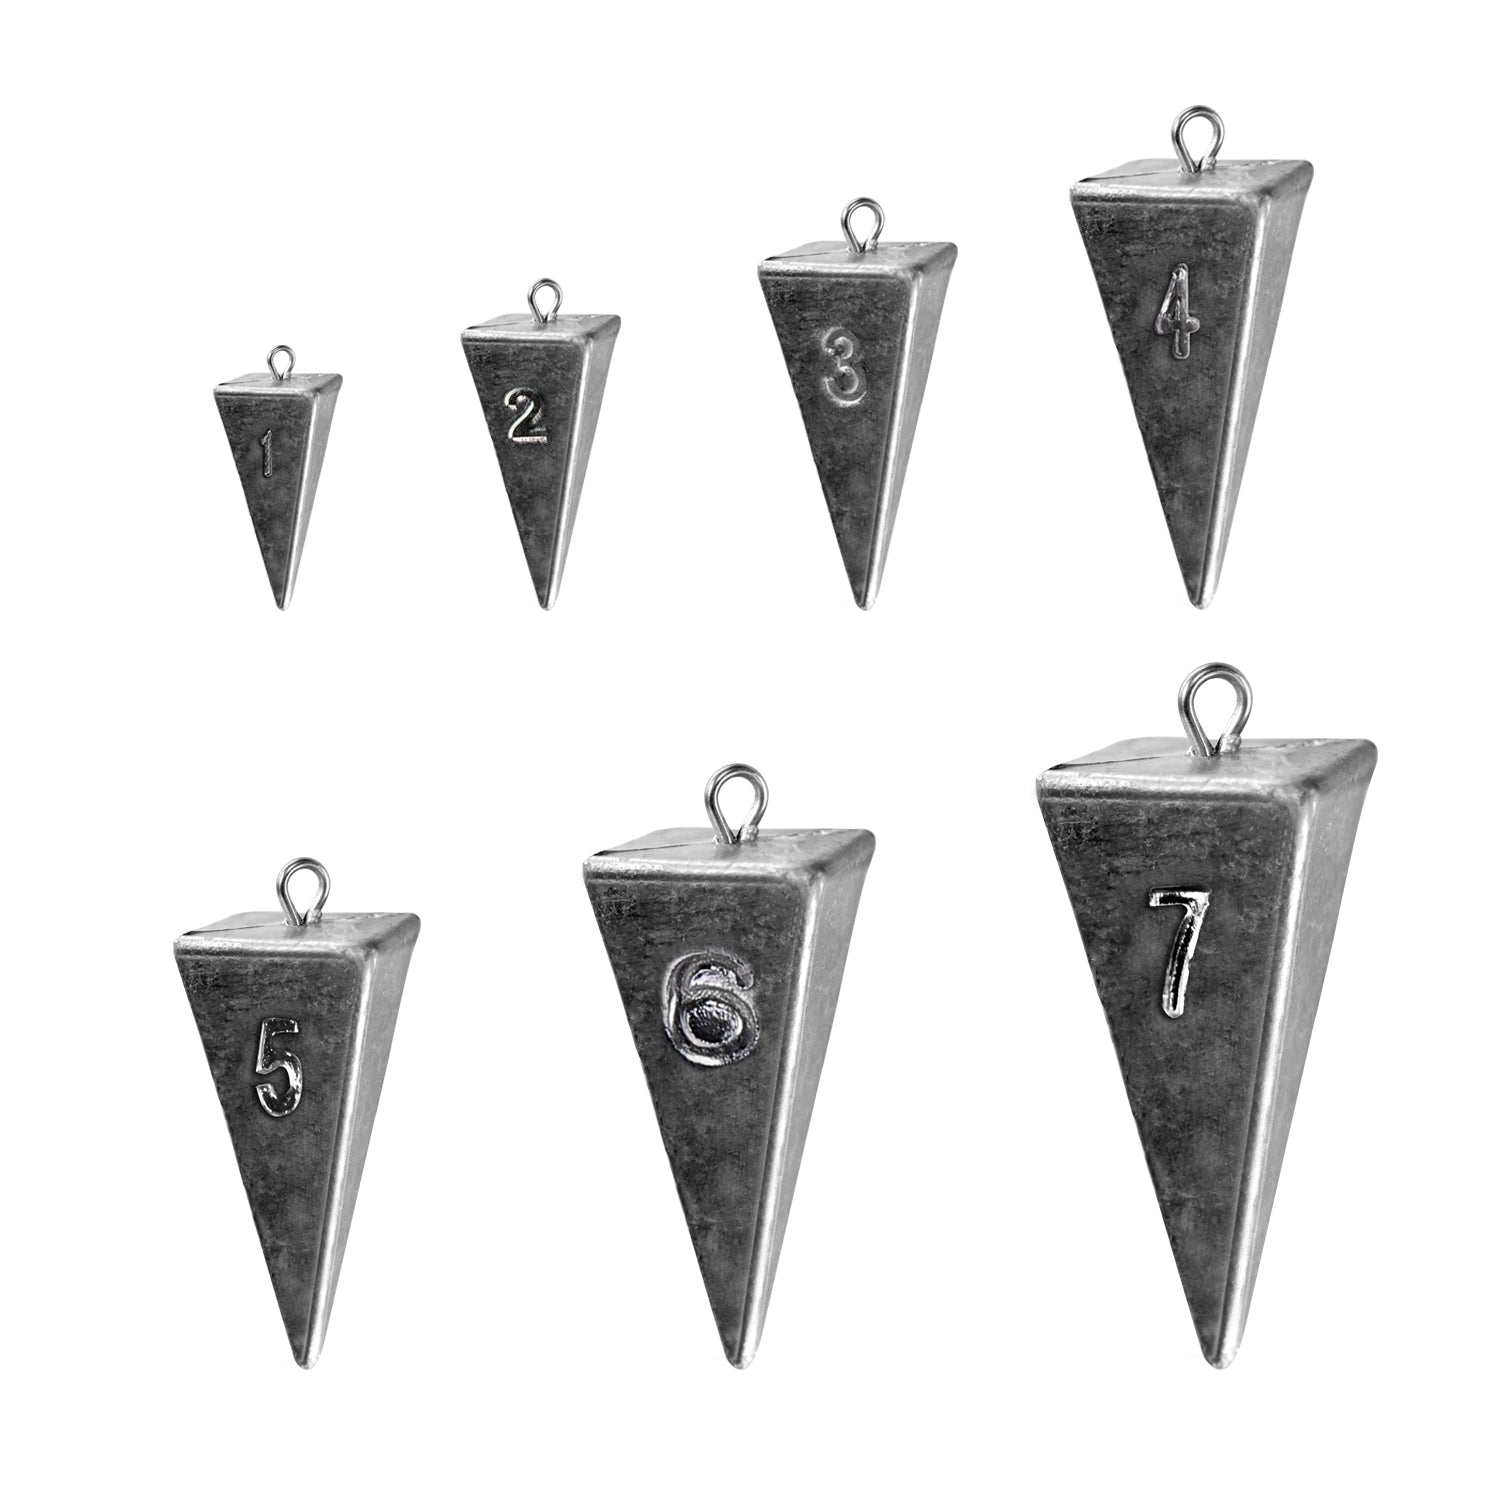 THKFISH Inline Trolling Pyramid Sinkers Weights For Fishing